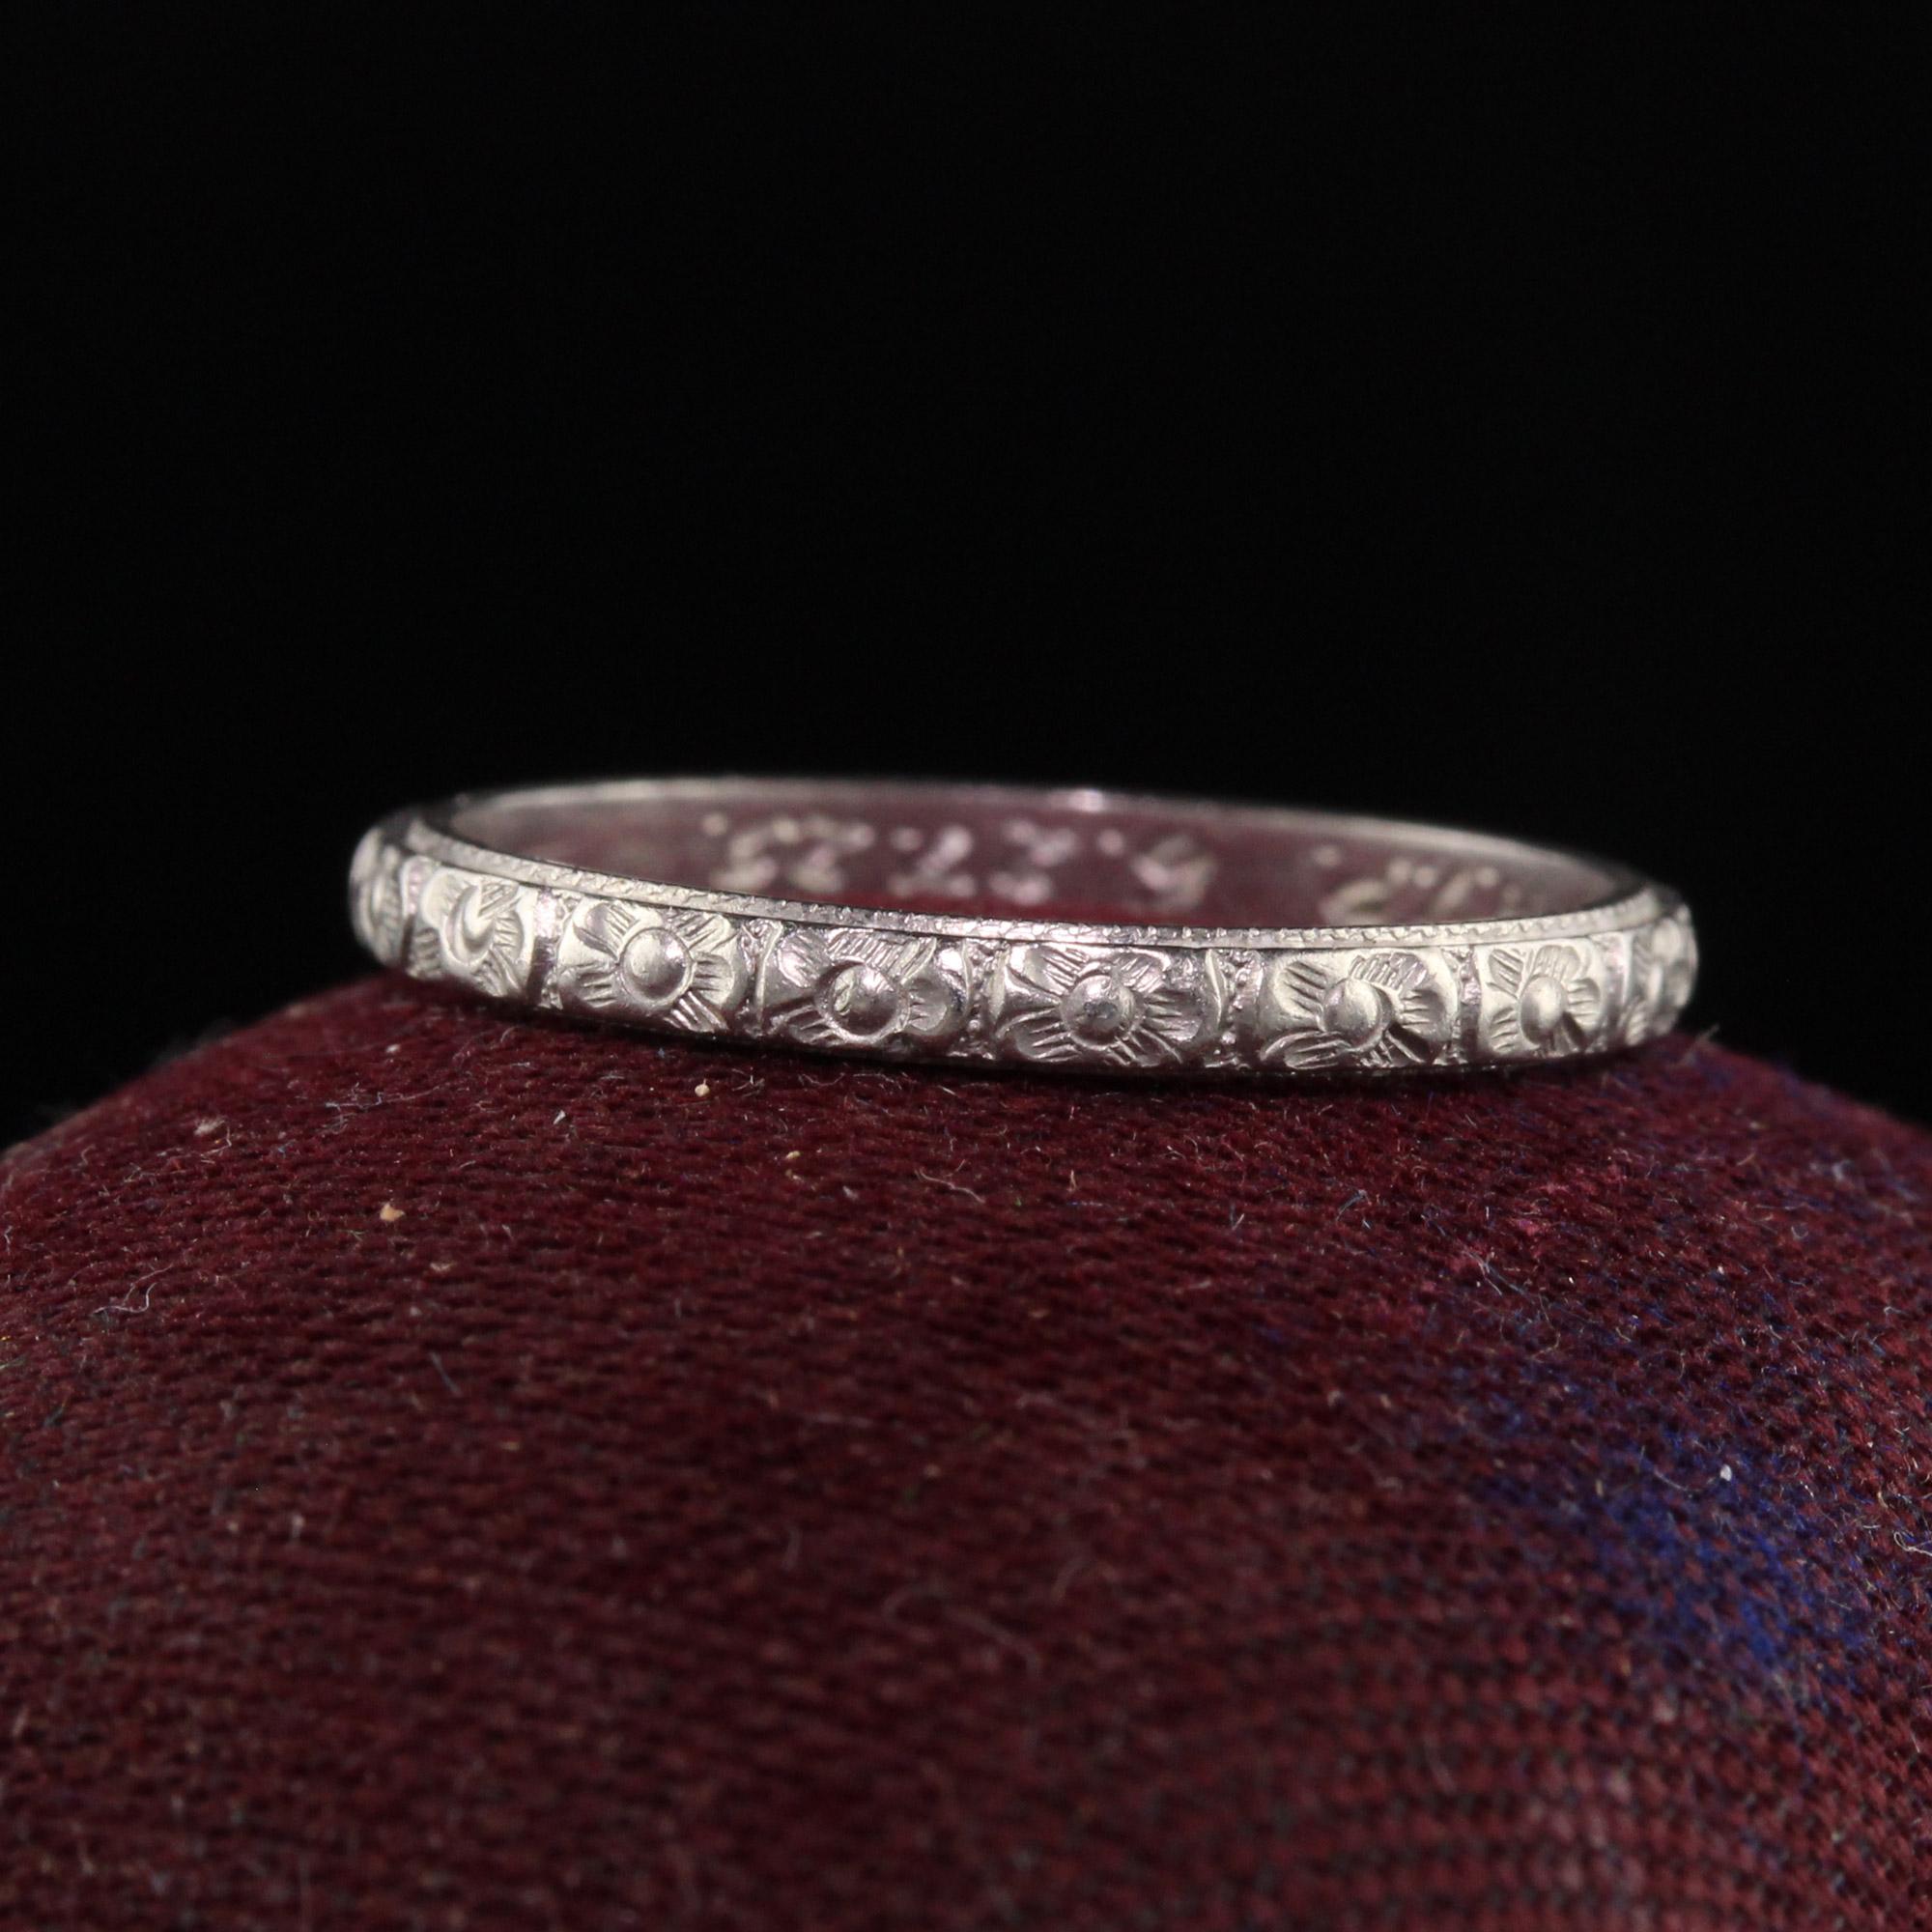 Beautiful Antique Art Deco Platinum Classic Flower Engraved Wedding Band. This incredible wedding band is crafted in platinum and has beautiful flower engravings around the entire wedding band and has A. M. R to H. V. P. 6-27-25